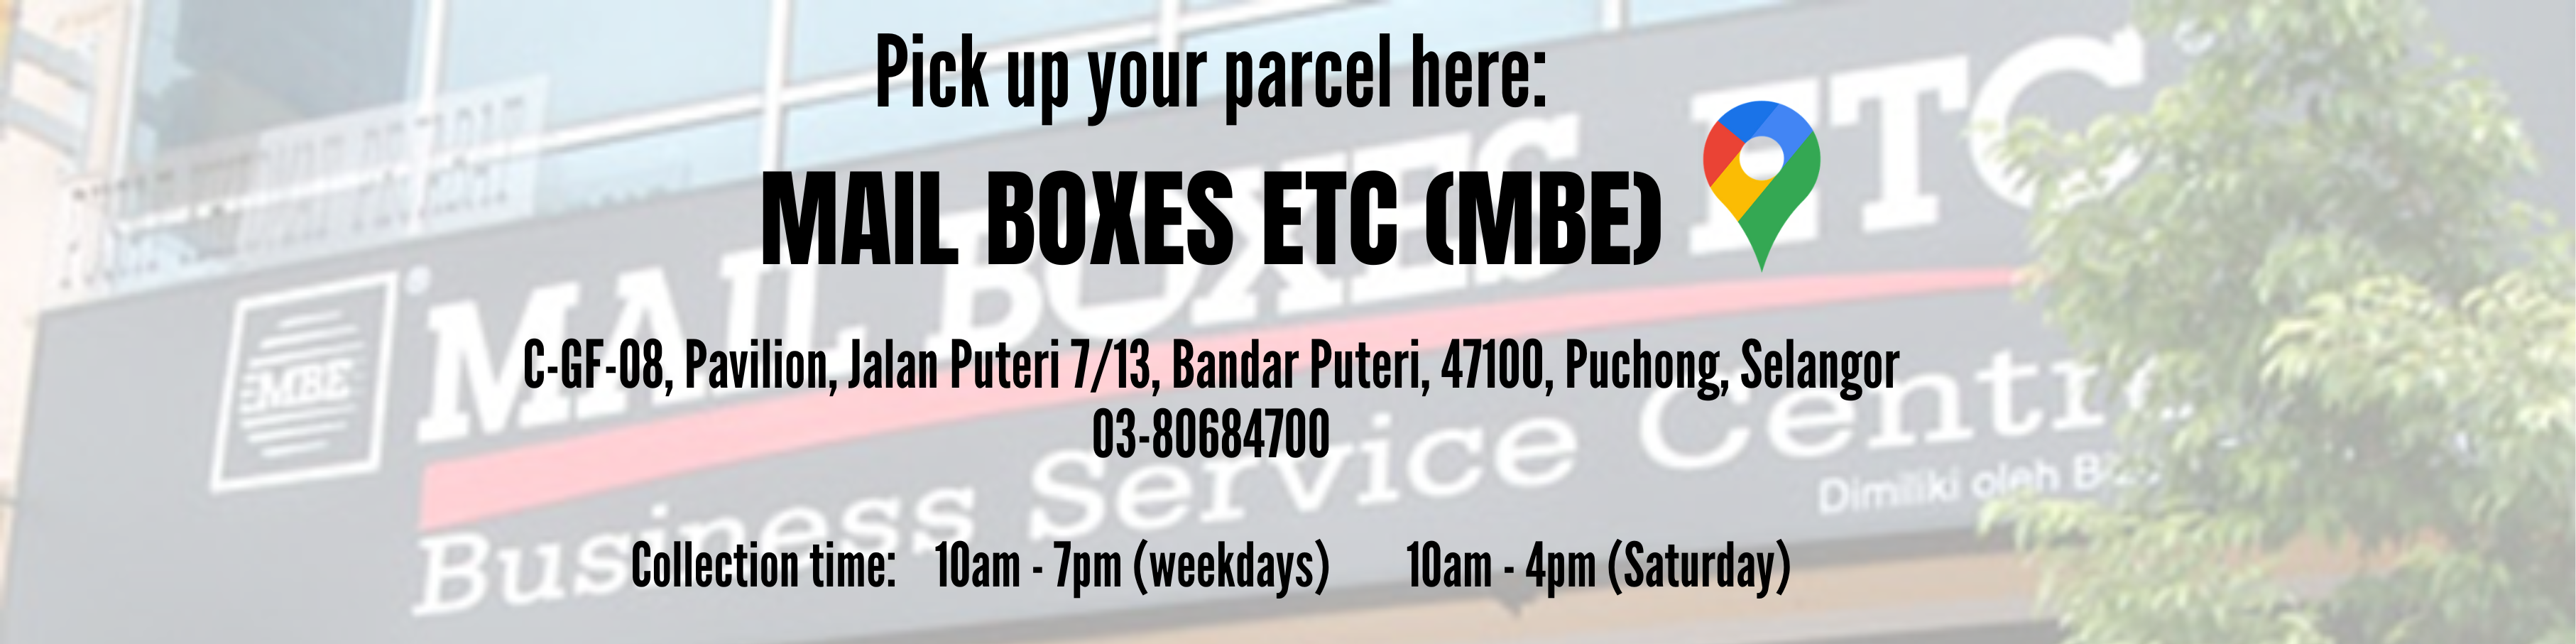 Pick up your parcel here